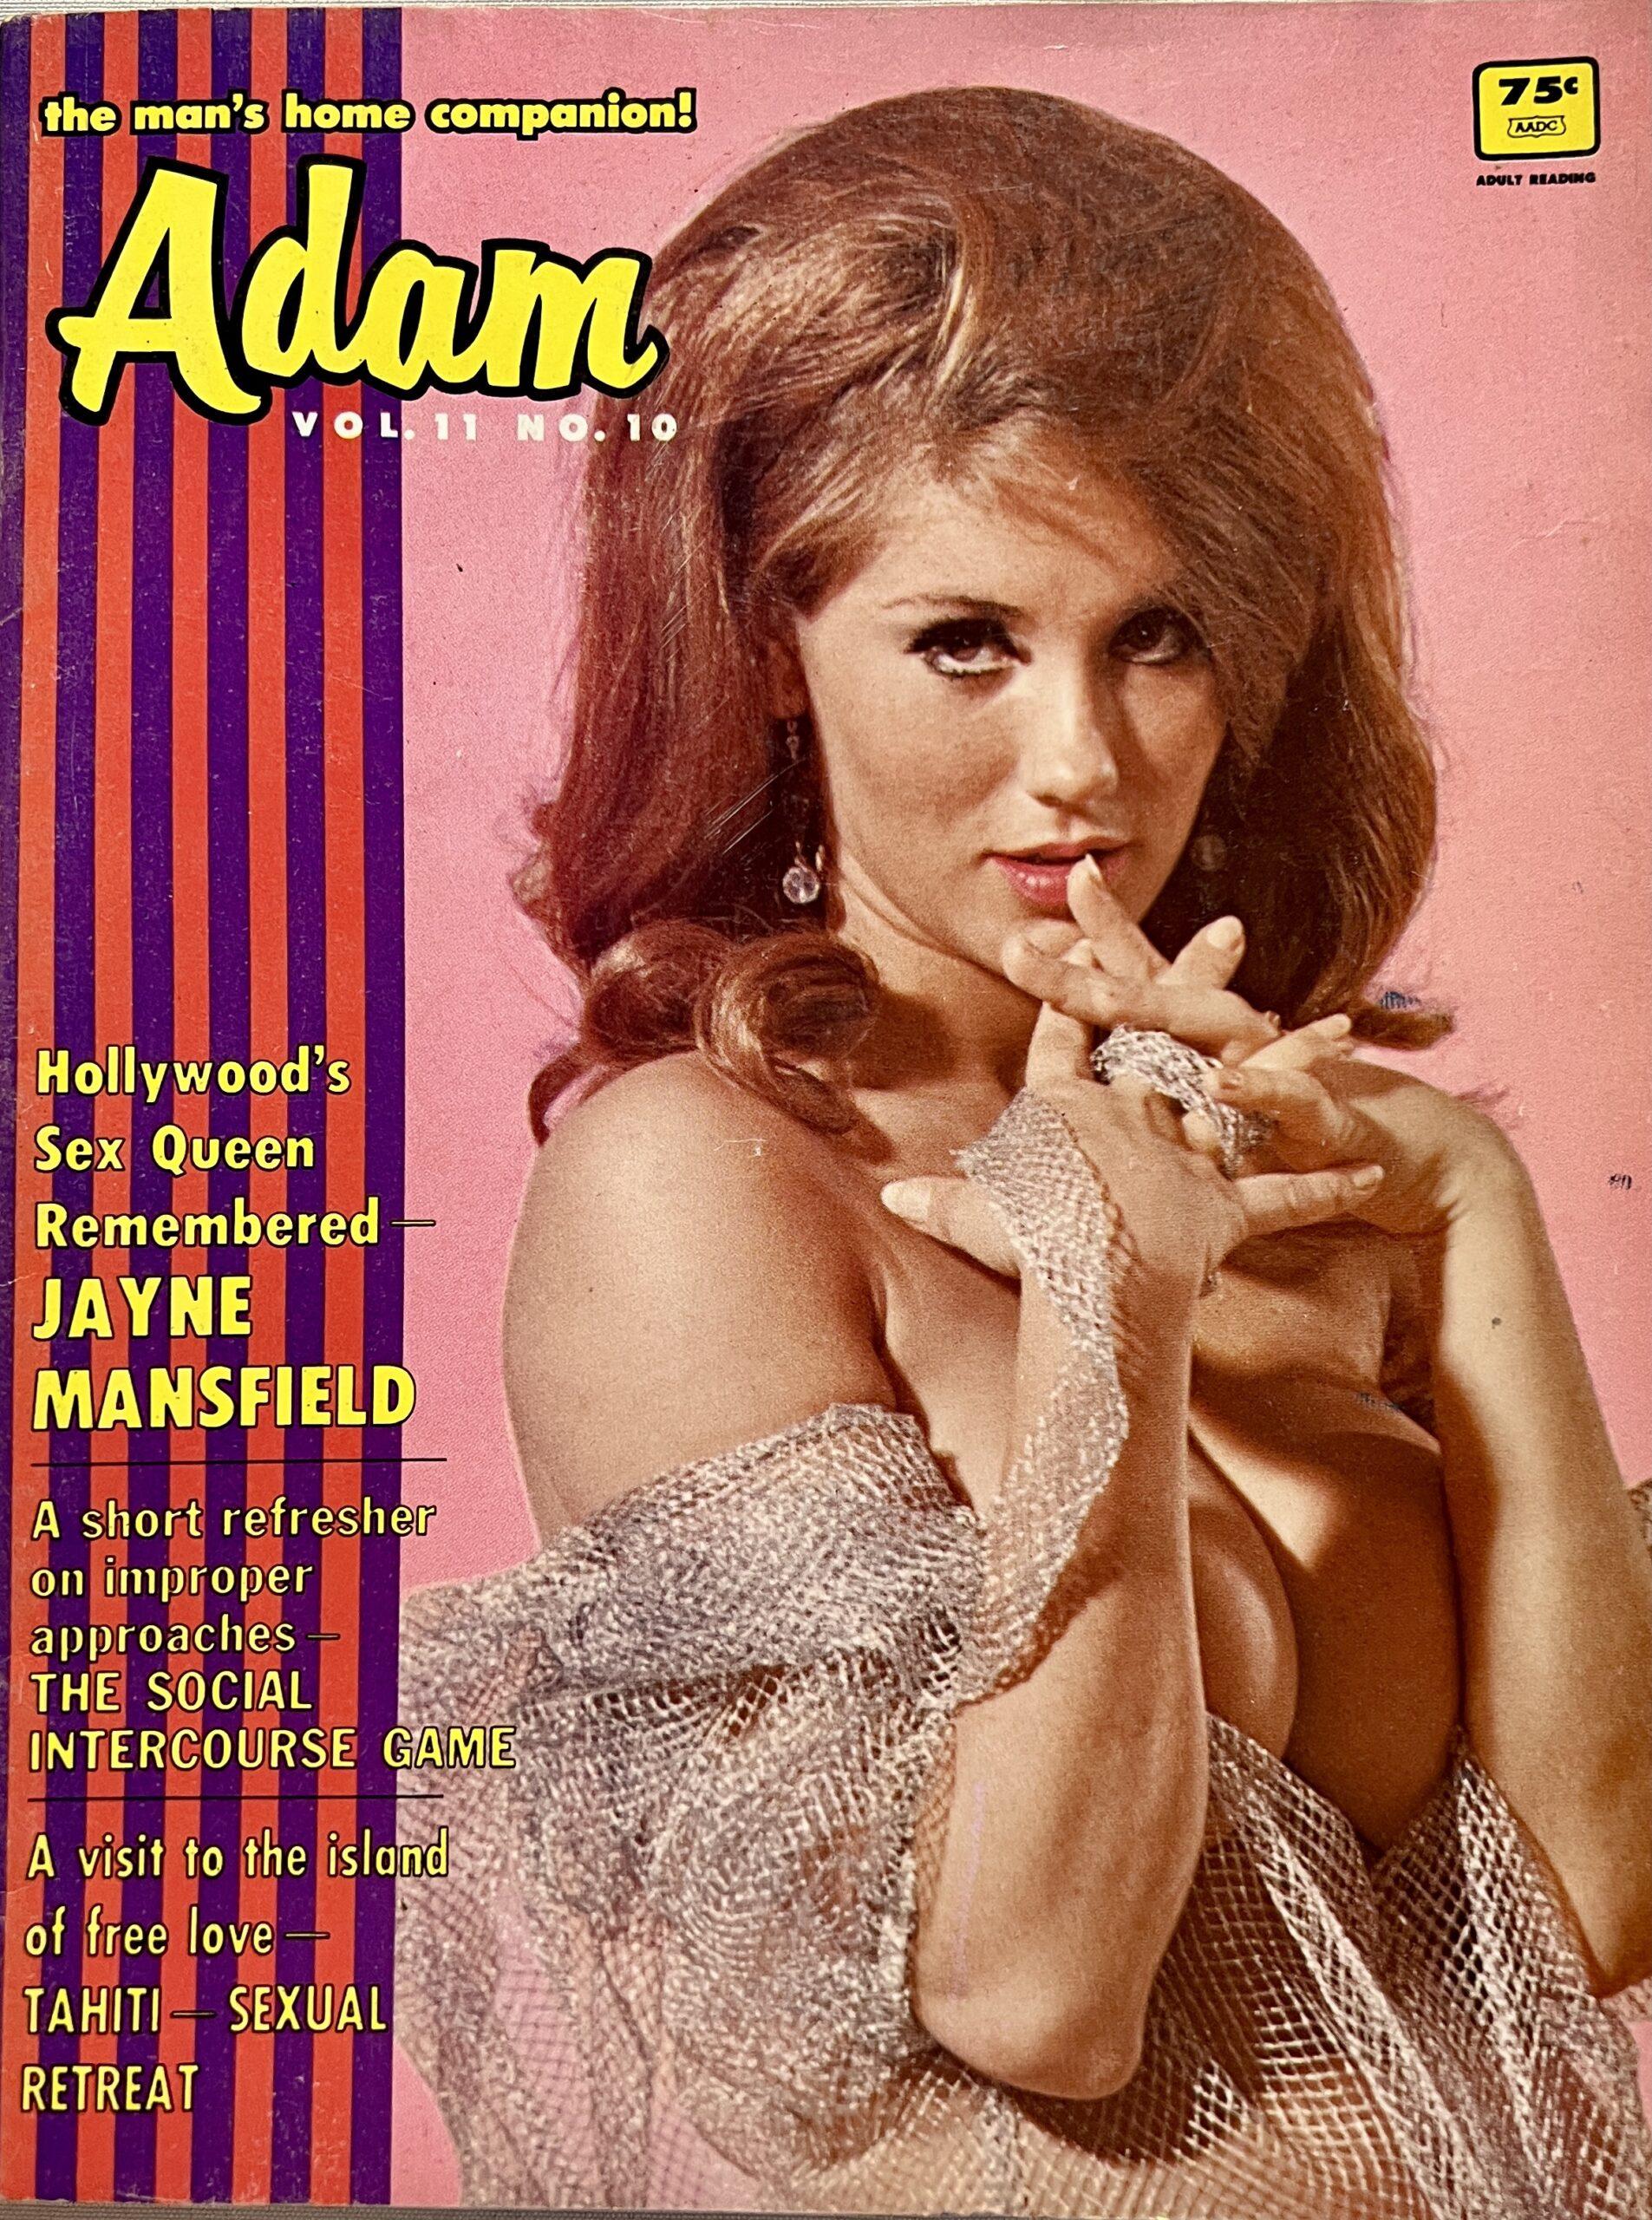 Adam 11/10 October 1967 Adult Swingers and Personals picture